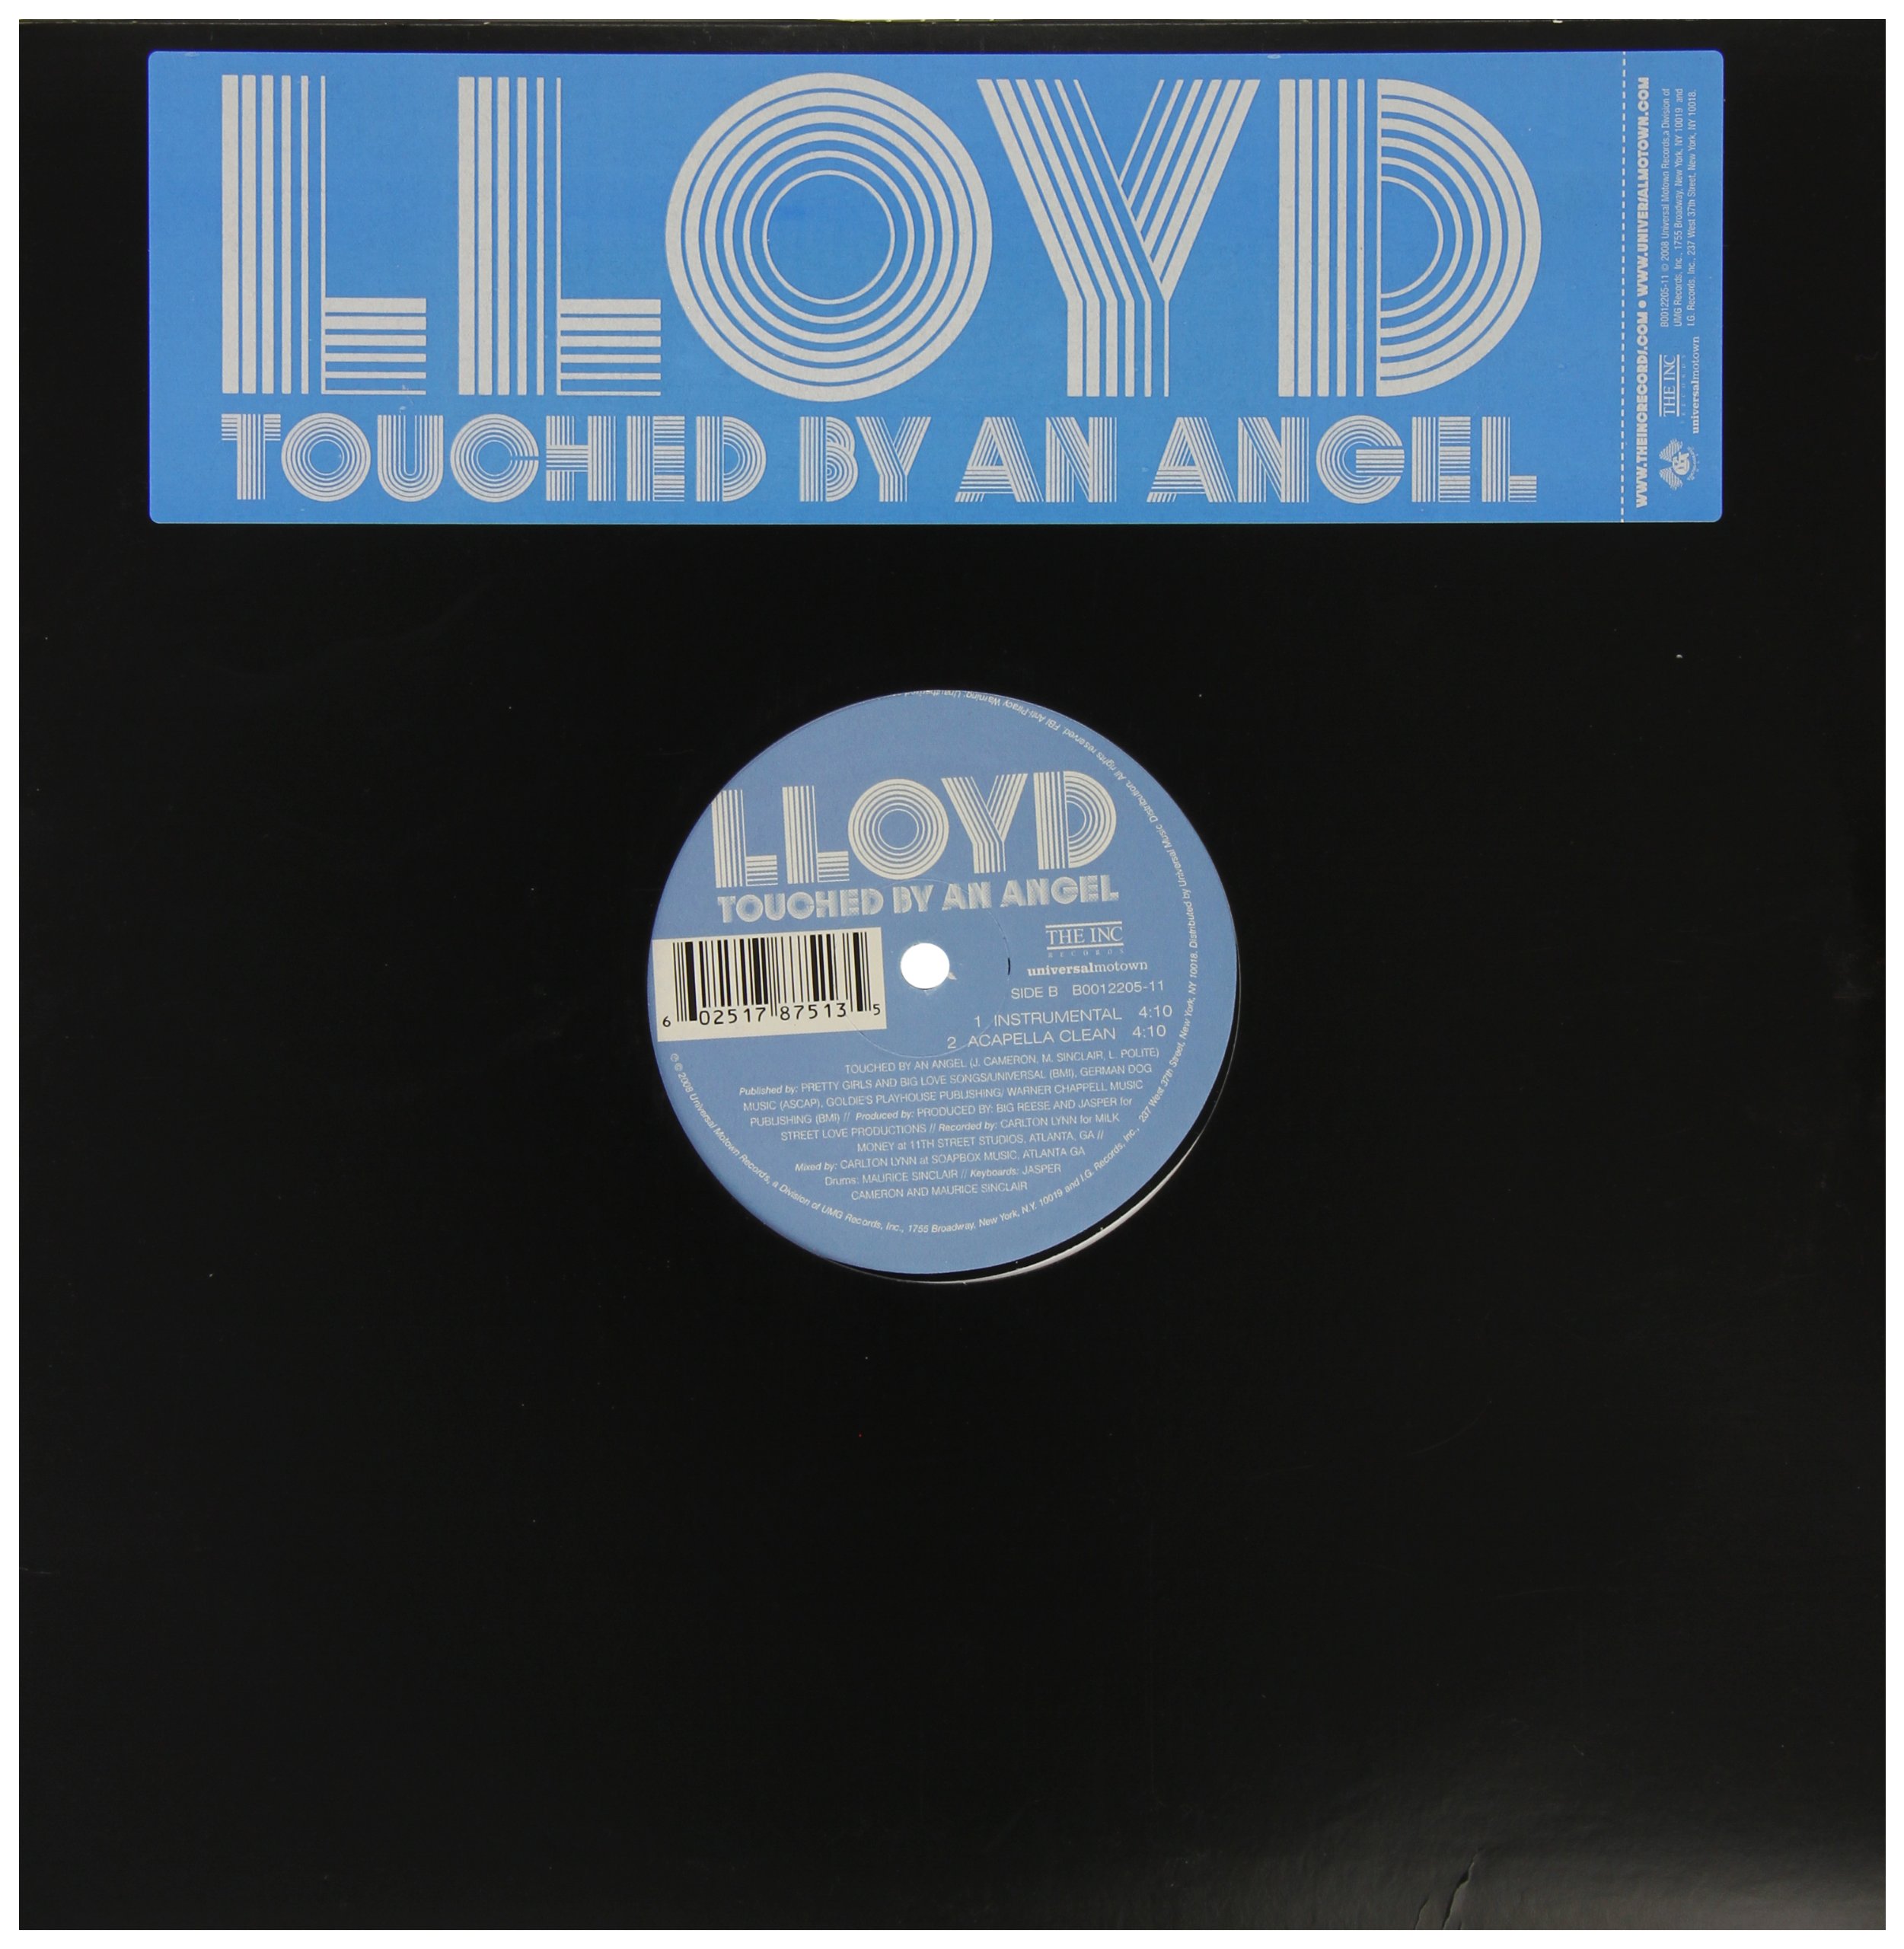 Touched By An Angel [Vinyl Maxi-Single]